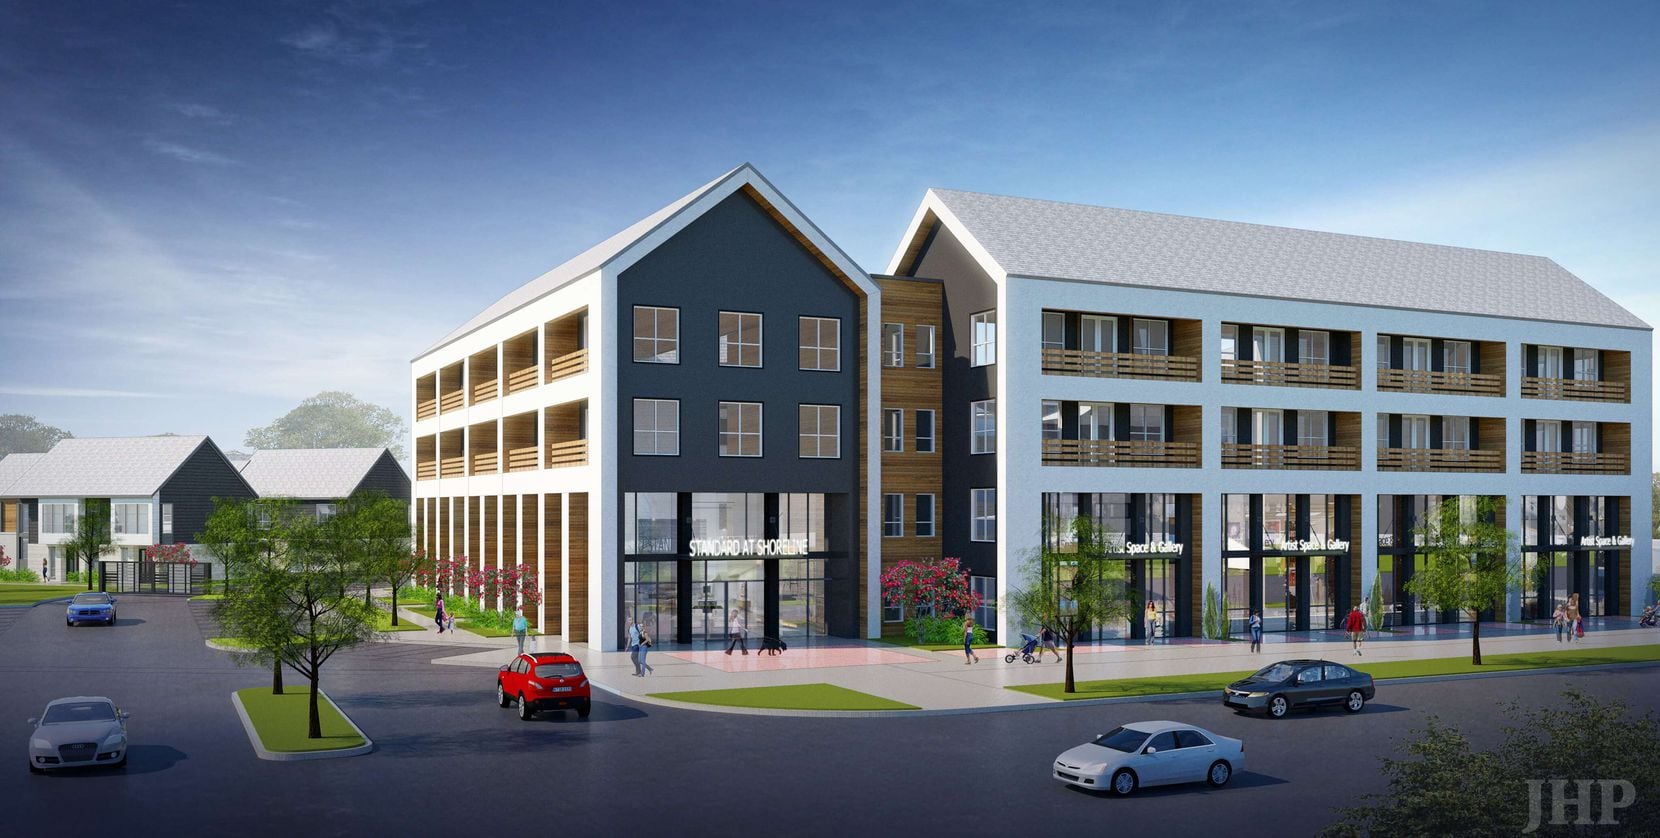 The most recent rendering of the Garland Road development proposed by Ojala Partners just...